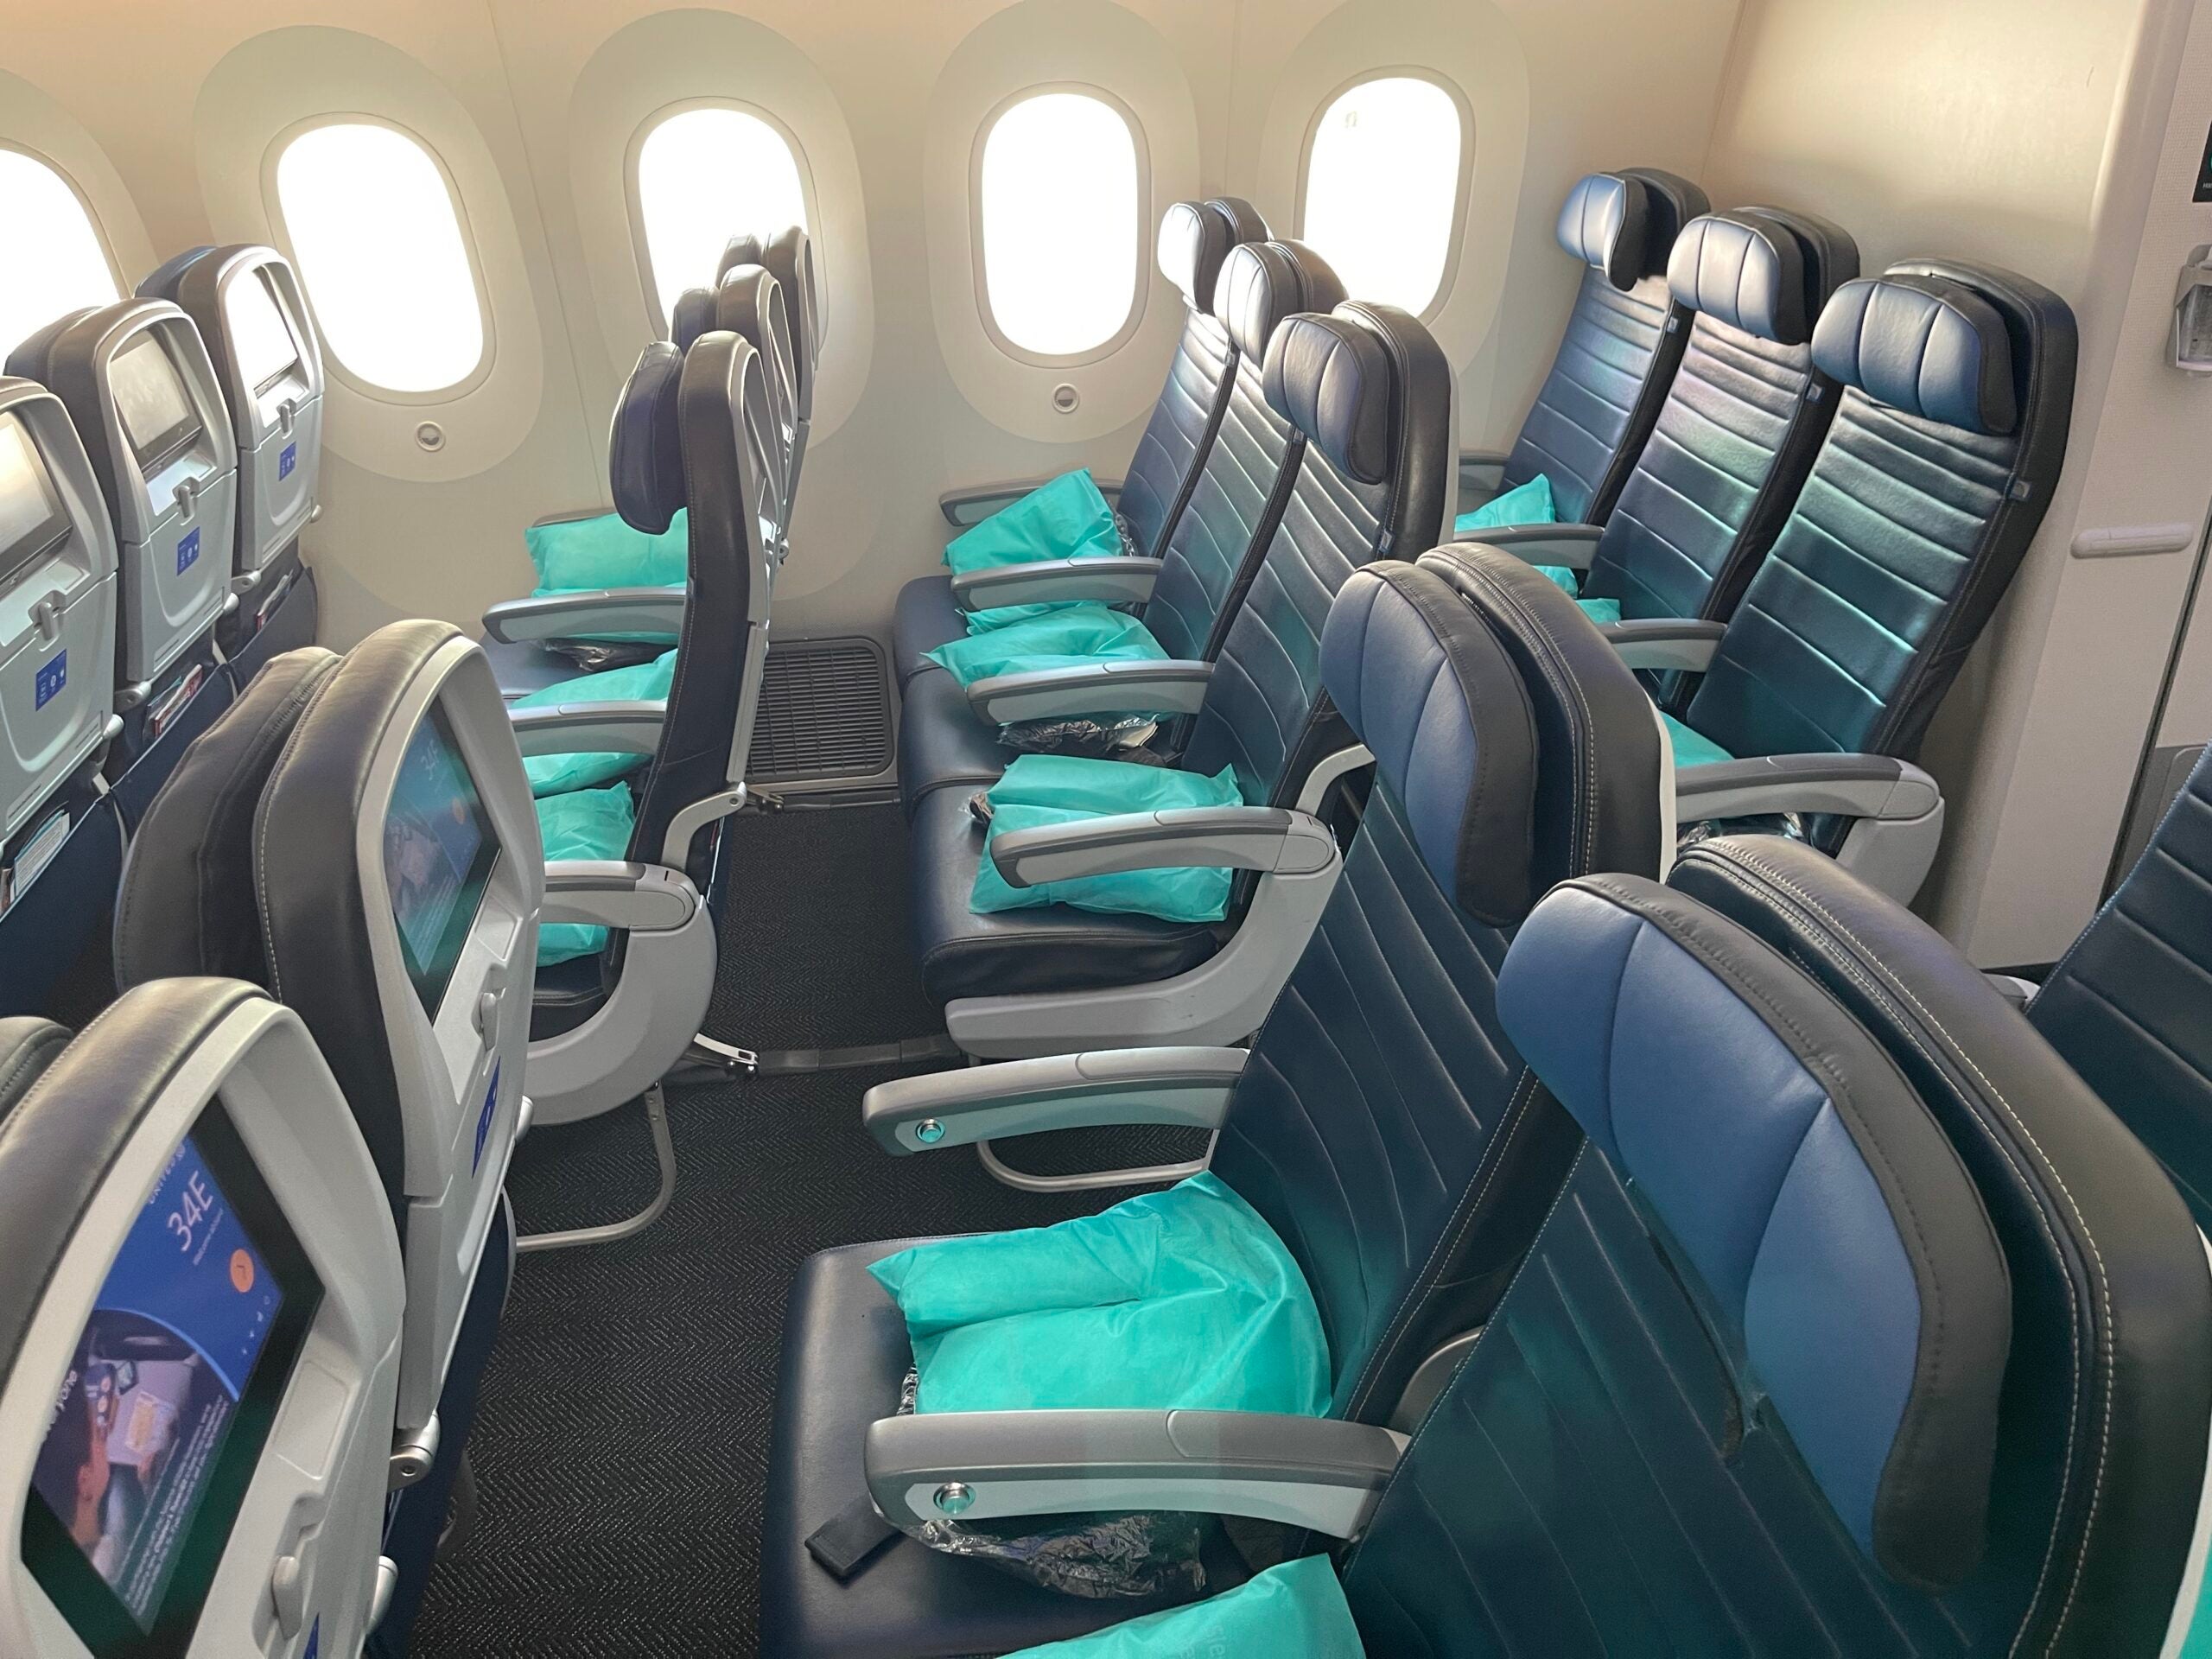 United Airlines economy class on a Boeing 787-9 Dreamliner